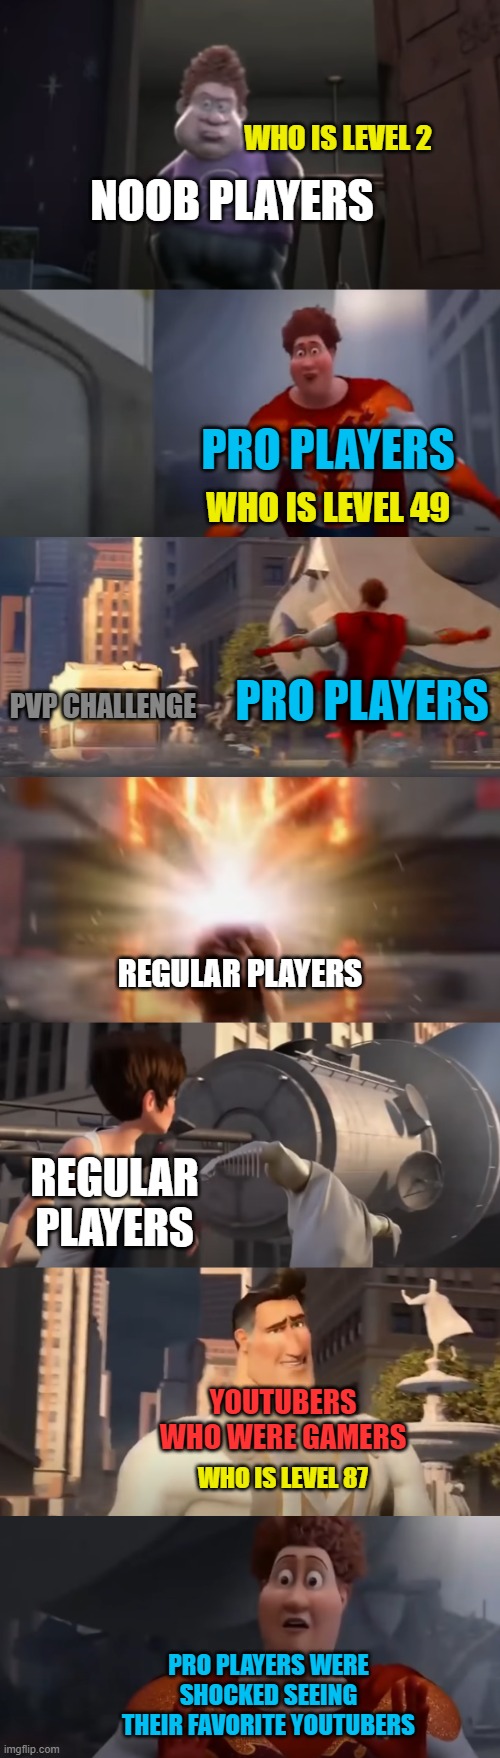 Players are like | WHO IS LEVEL 2; NOOB PLAYERS; PRO PLAYERS; WHO IS LEVEL 49; PRO PLAYERS; PVP CHALLENGE; REGULAR PLAYERS; REGULAR PLAYERS; YOUTUBERS WHO WERE GAMERS; WHO IS LEVEL 87; PRO PLAYERS WERE SHOCKED SEEING THEIR FAVORITE YOUTUBERS | image tagged in snotty boy glow up meme extended,multiplayer,noob,pro gamer move,youtuber | made w/ Imgflip meme maker